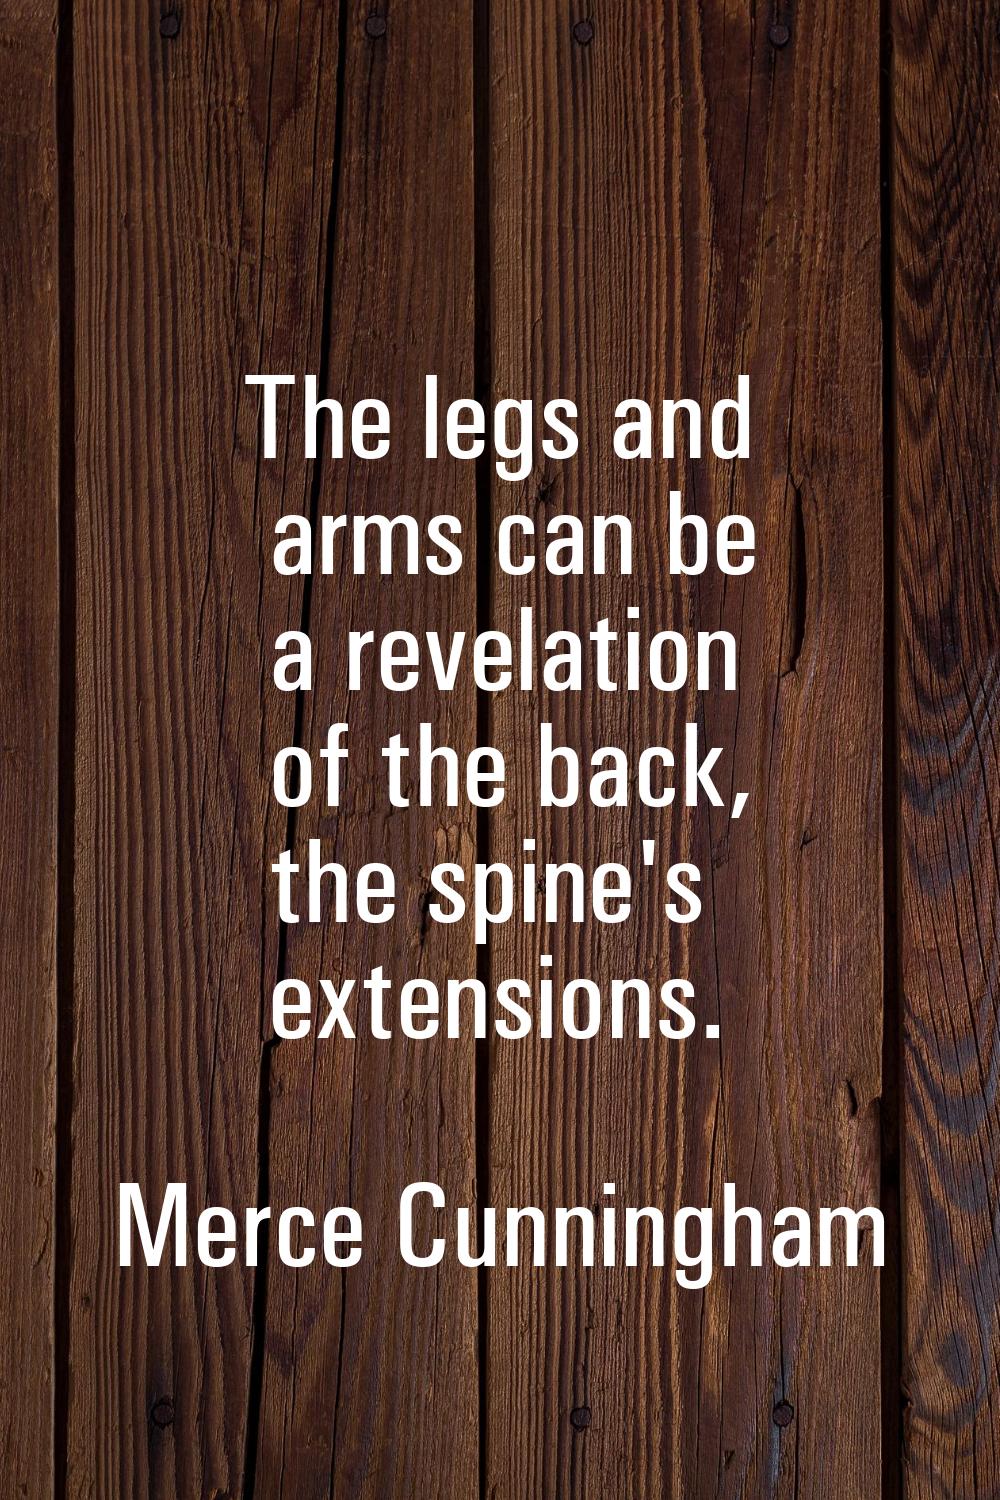 The legs and arms can be a revelation of the back, the spine's extensions.